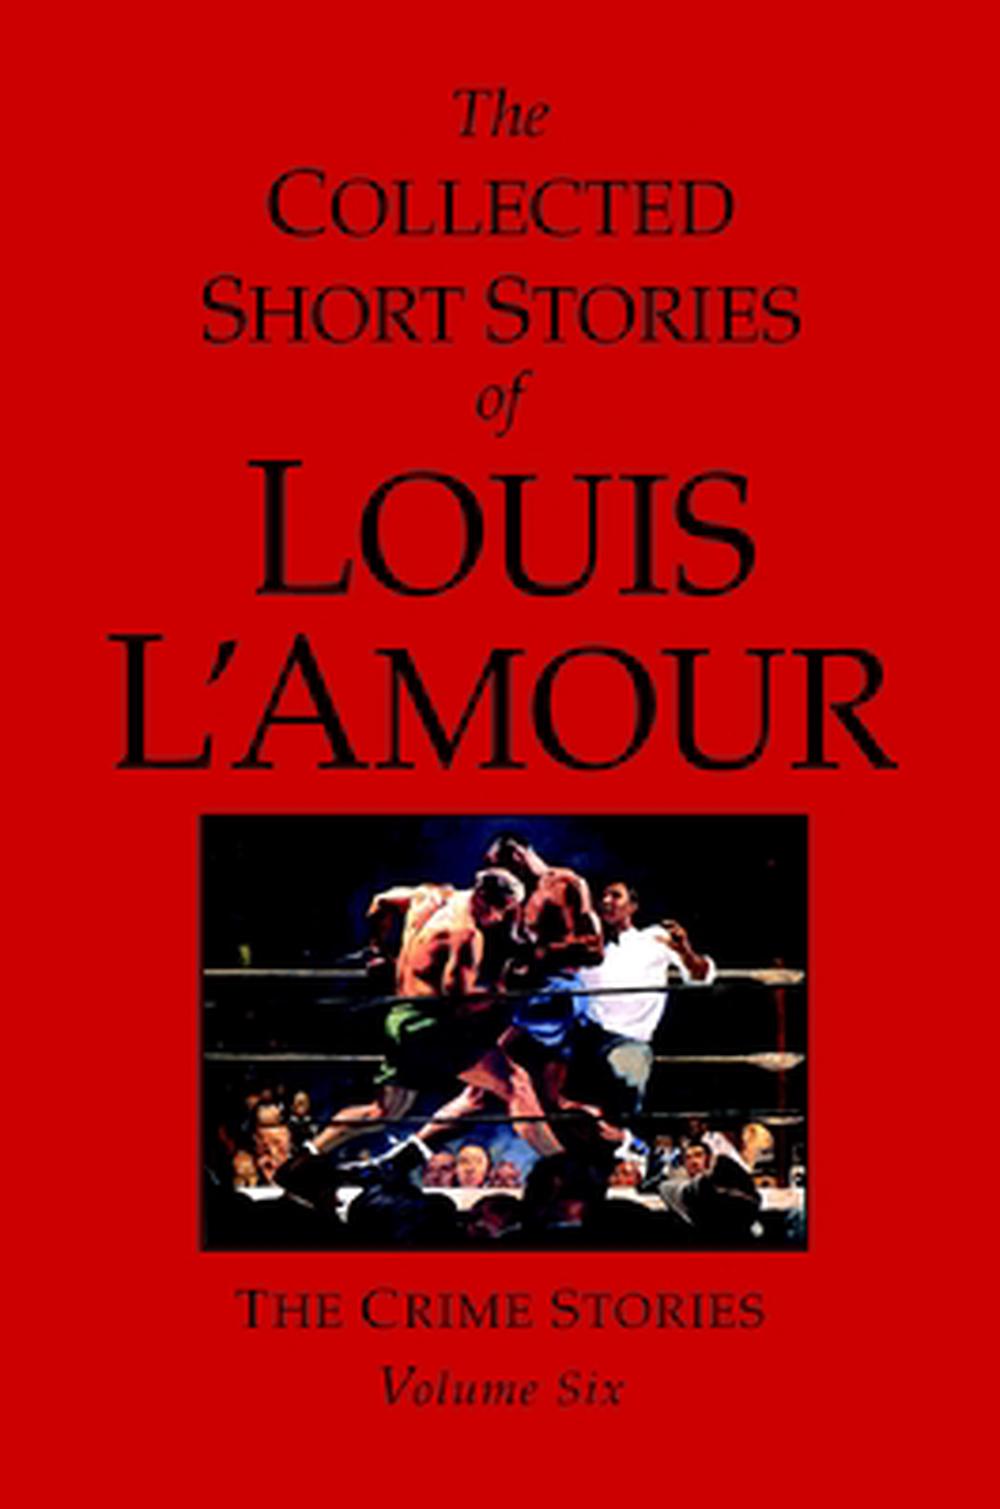 The Collected Short Stories of Louis L&#39;Amour: The Crime Stories by Louis L&#39;Amour 9780553805314 ...